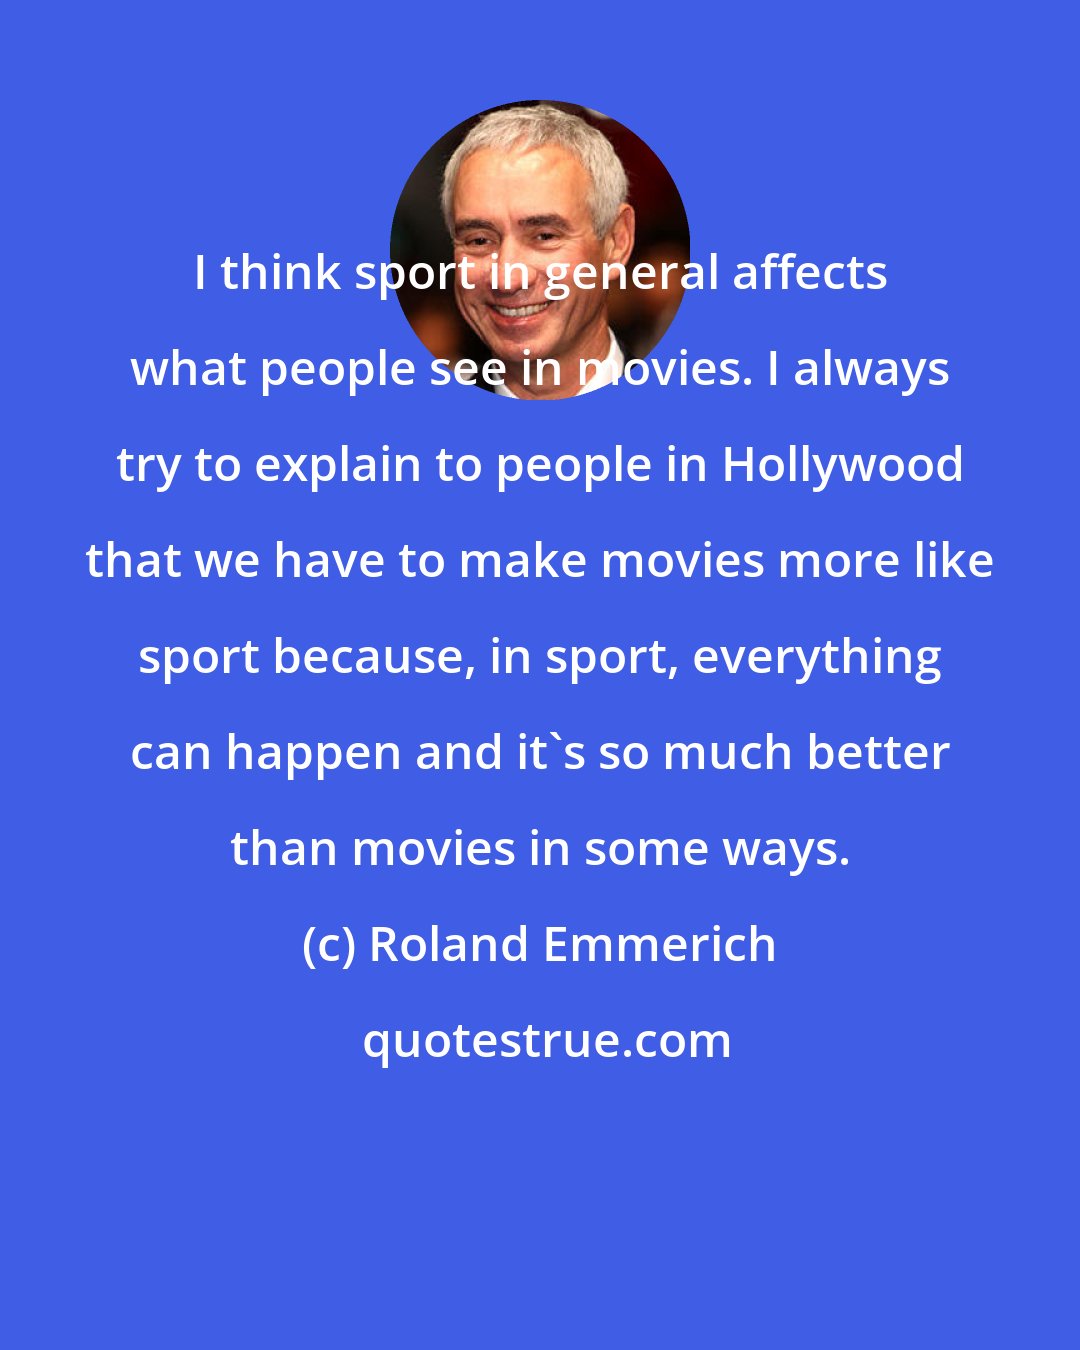 Roland Emmerich: I think sport in general affects what people see in movies. I always try to explain to people in Hollywood that we have to make movies more like sport because, in sport, everything can happen and it's so much better than movies in some ways.